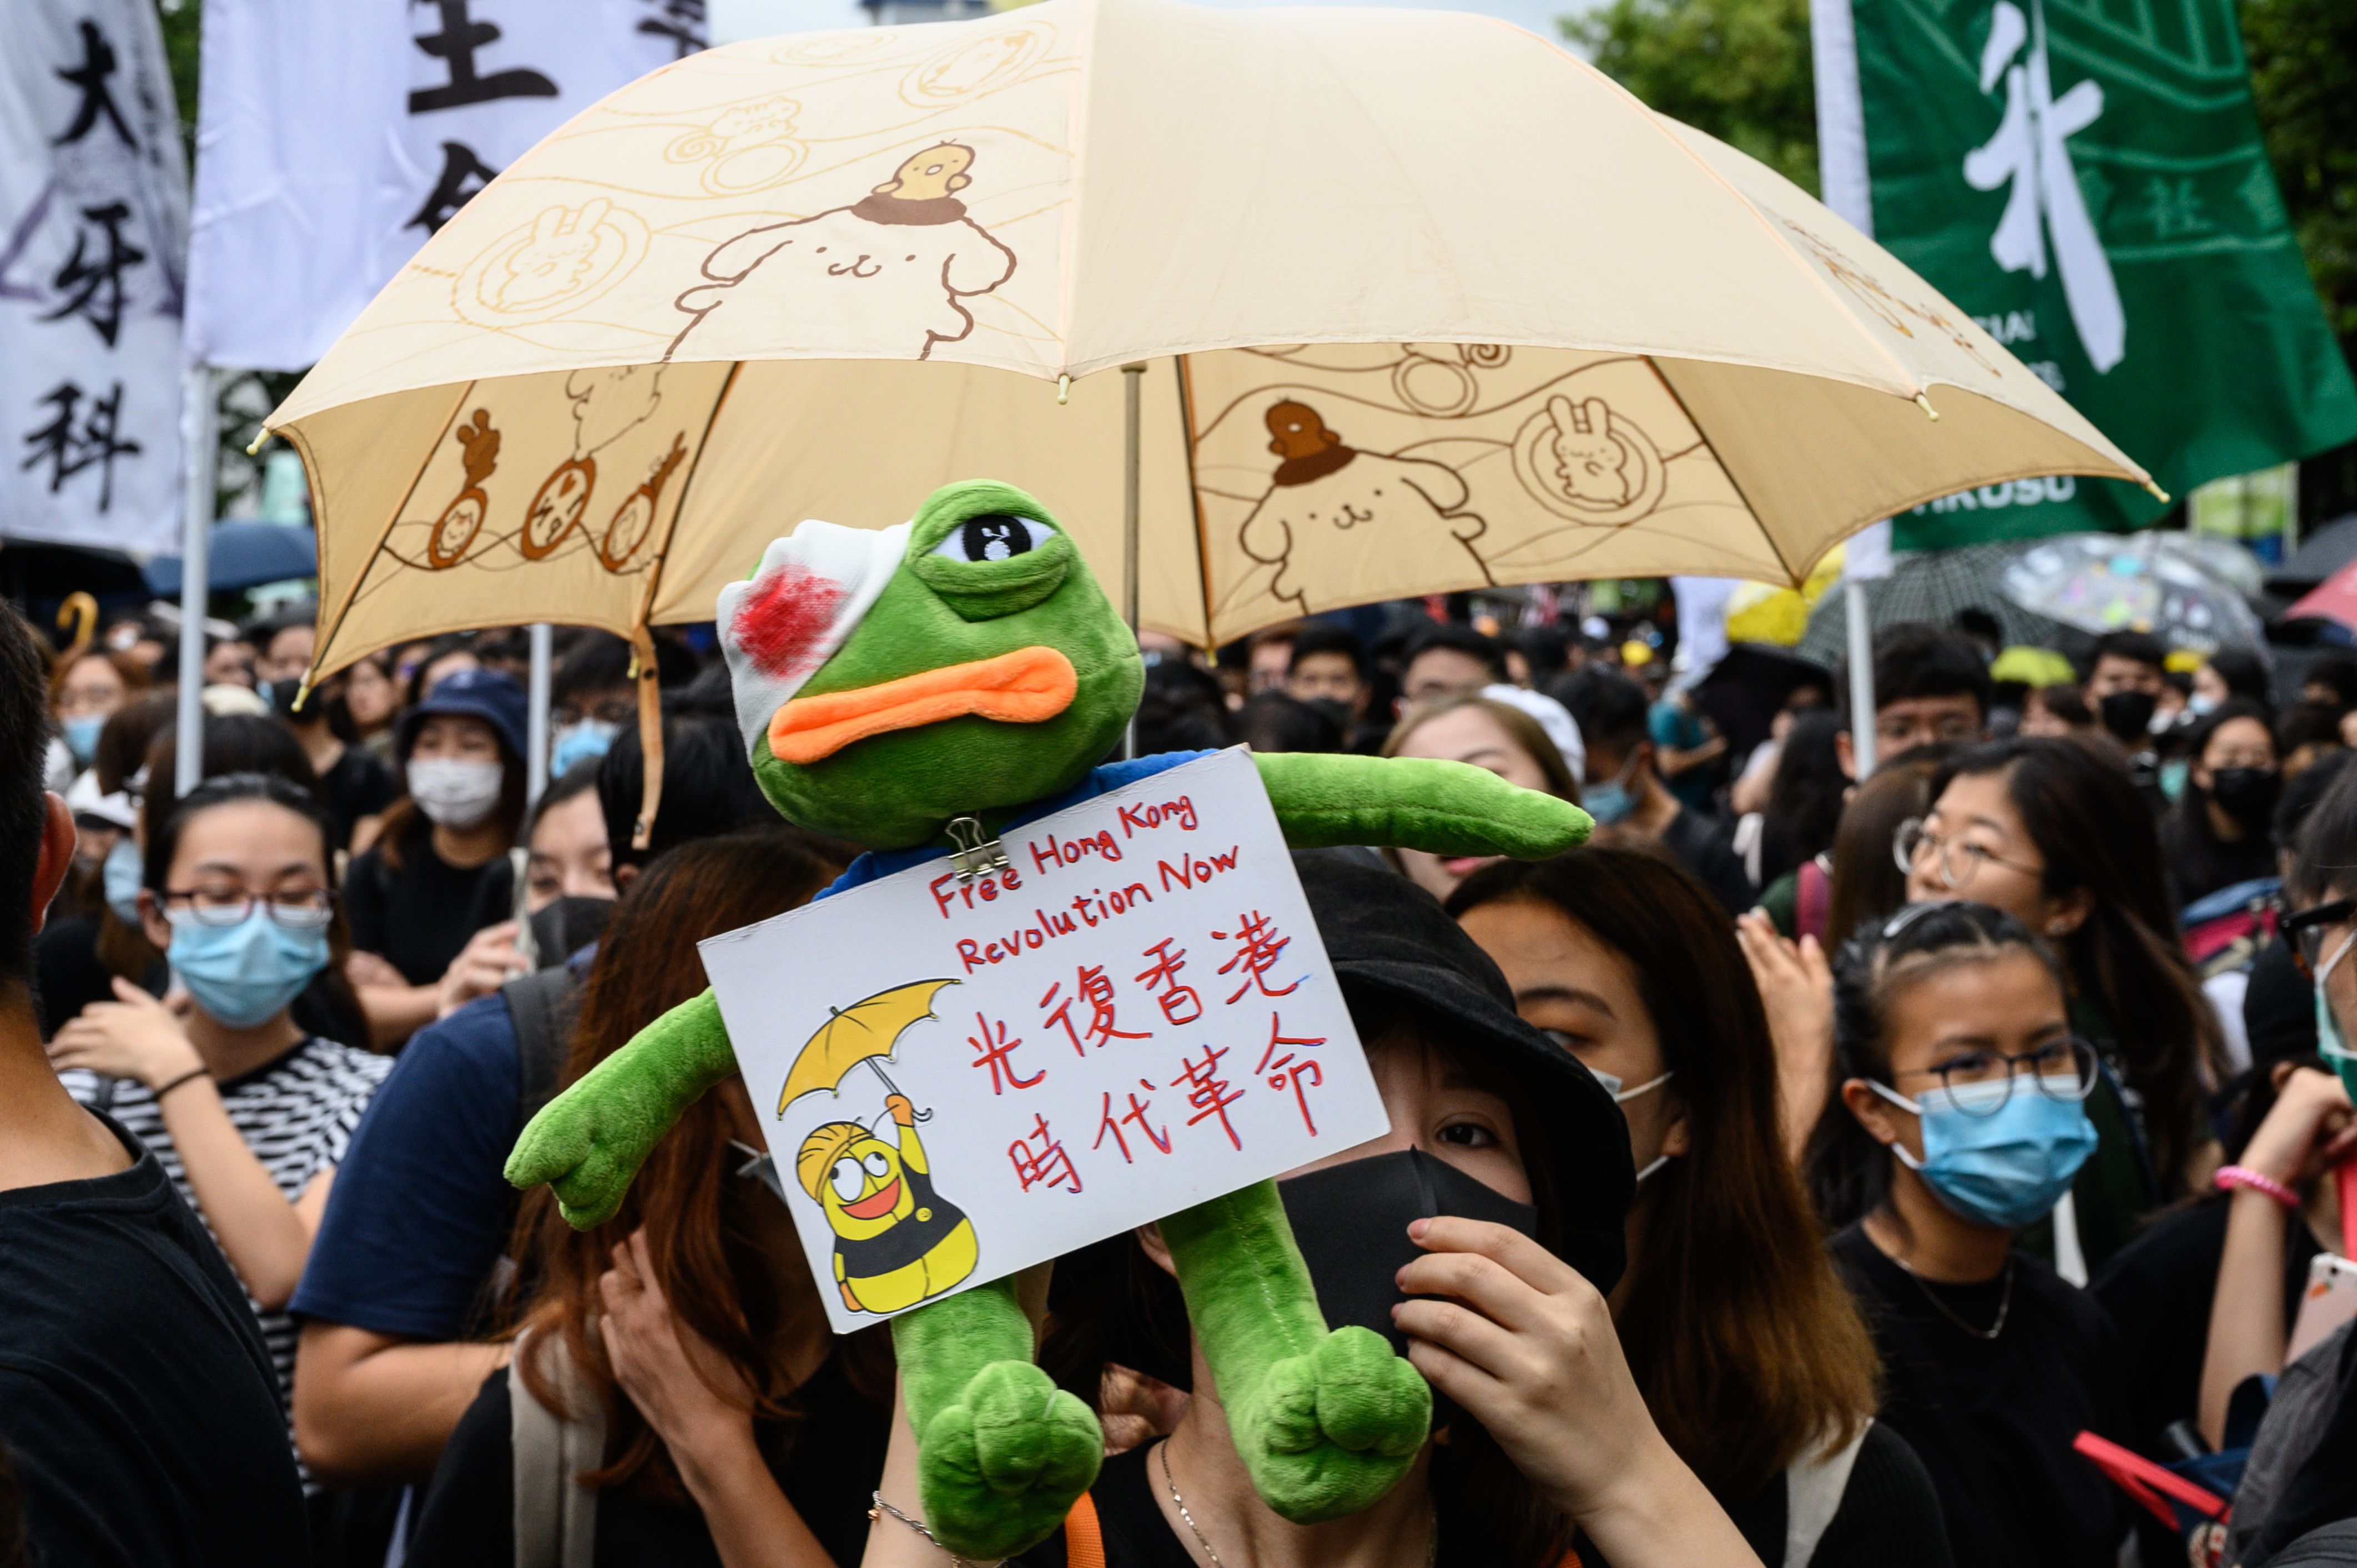 Students attend a school boycott rally at the Chinese University of Hong Kong on September 2, 2019.